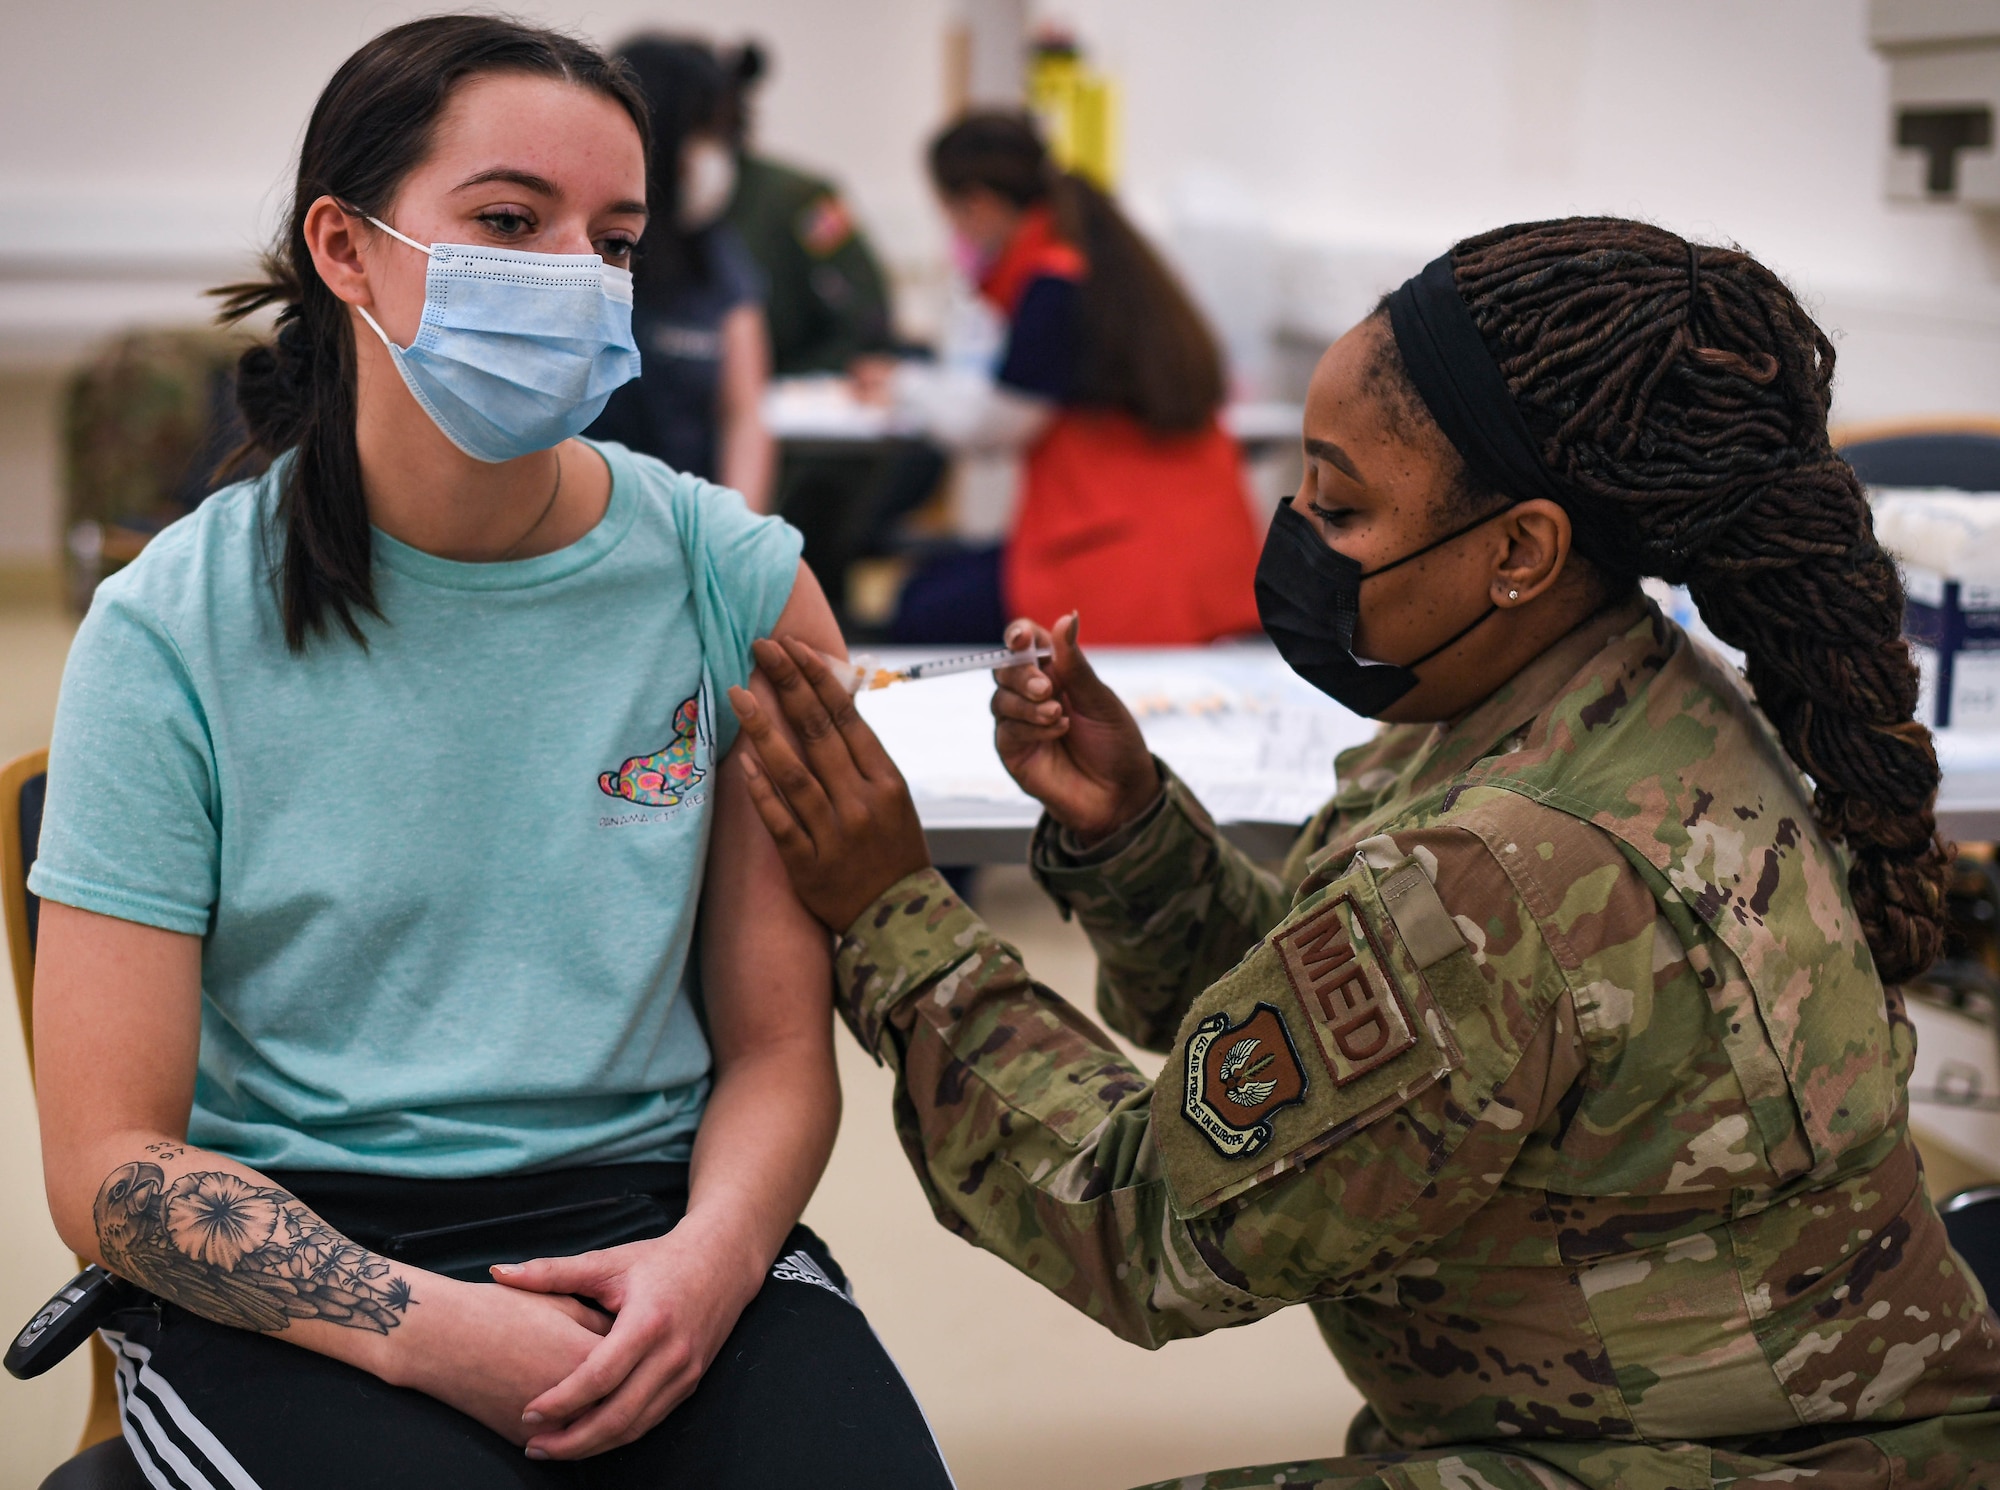 U.S. Air Force Tech. Sgt. Latasha Smith, 86th Operational Medical Readiness Squadron warrior medicine clinic flight chief, right, administers the Moderna COVID-19 booster shot to Airman 1st Class Trinity Duncan,  569th U.S. Forces Police Squadron security police, left, at Ramstein Air Base, Germany, Jan. 28, 2022. Since Jan. 4, 2021, Smith has been the continual point of contact for all of the 86th Medical Group COVID-19 vaccine lines, directly overseeing the schedule, patient administration and treatment rendered by 48 medics. (U.S. Air Force photo by Airman 1st Class Jared Lovett)